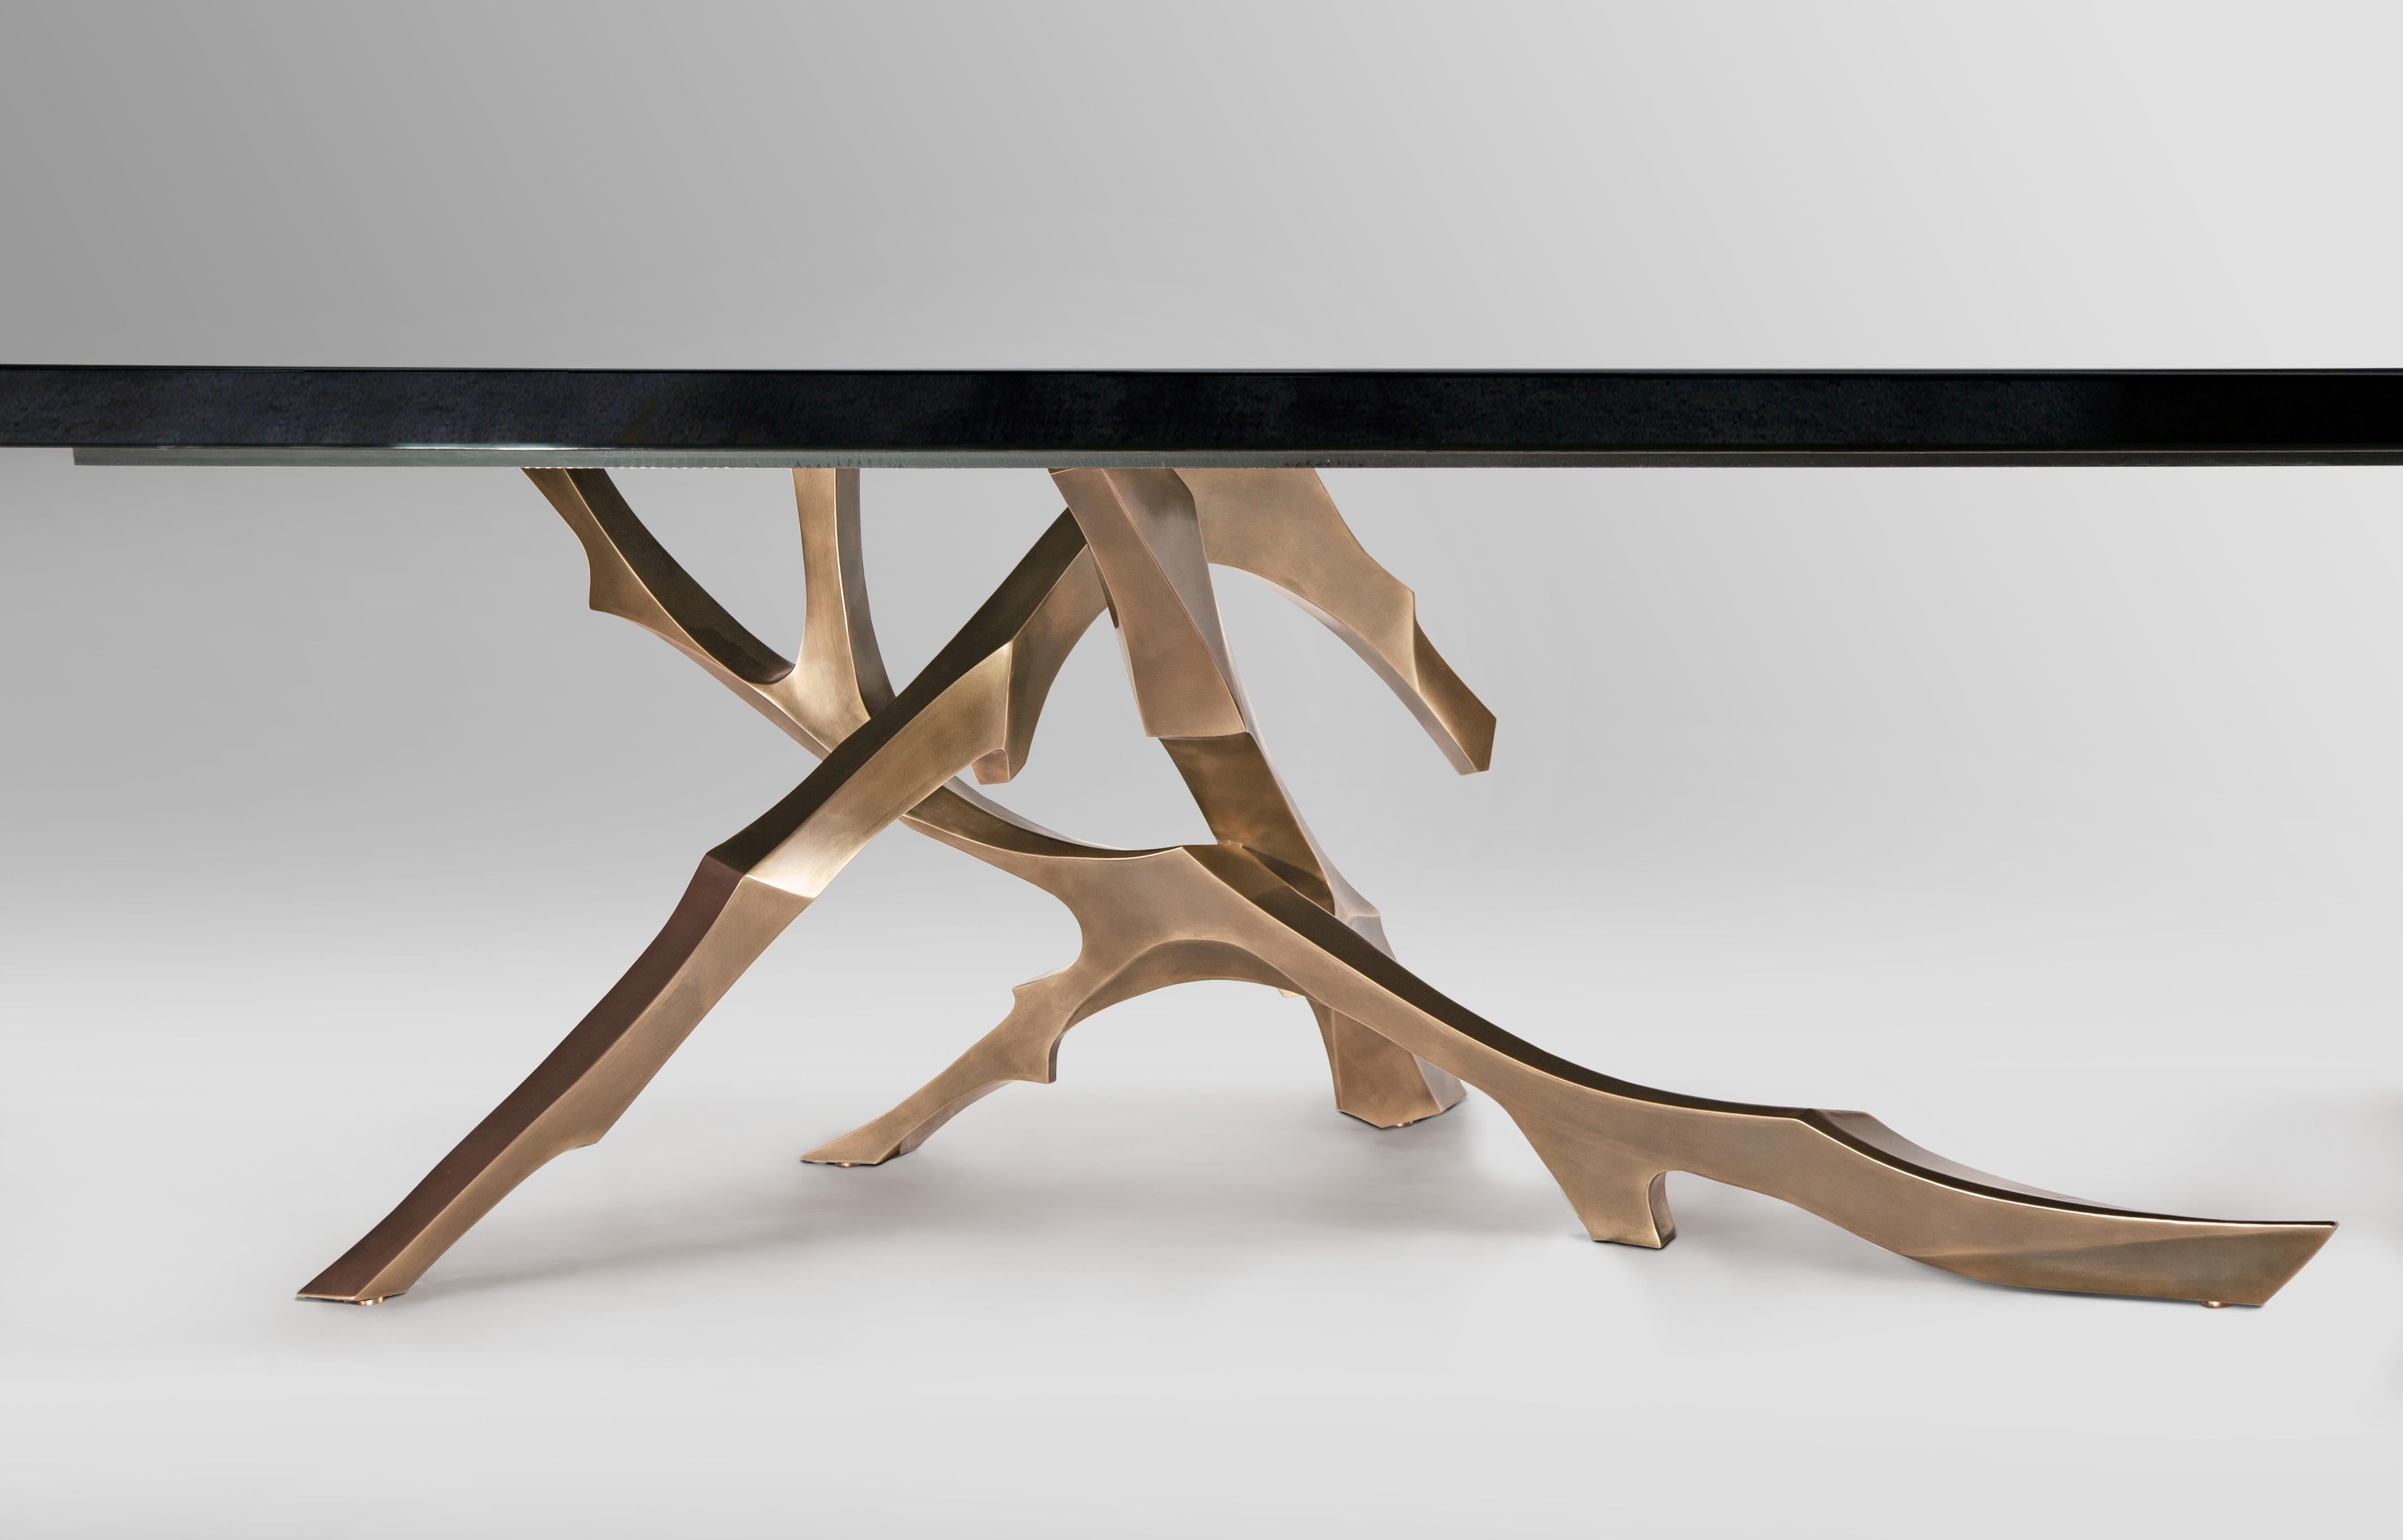 Patinated Live Edge Grolier Table: Cast Bronze Table Inspired by Nature’s Organic Branches For Sale